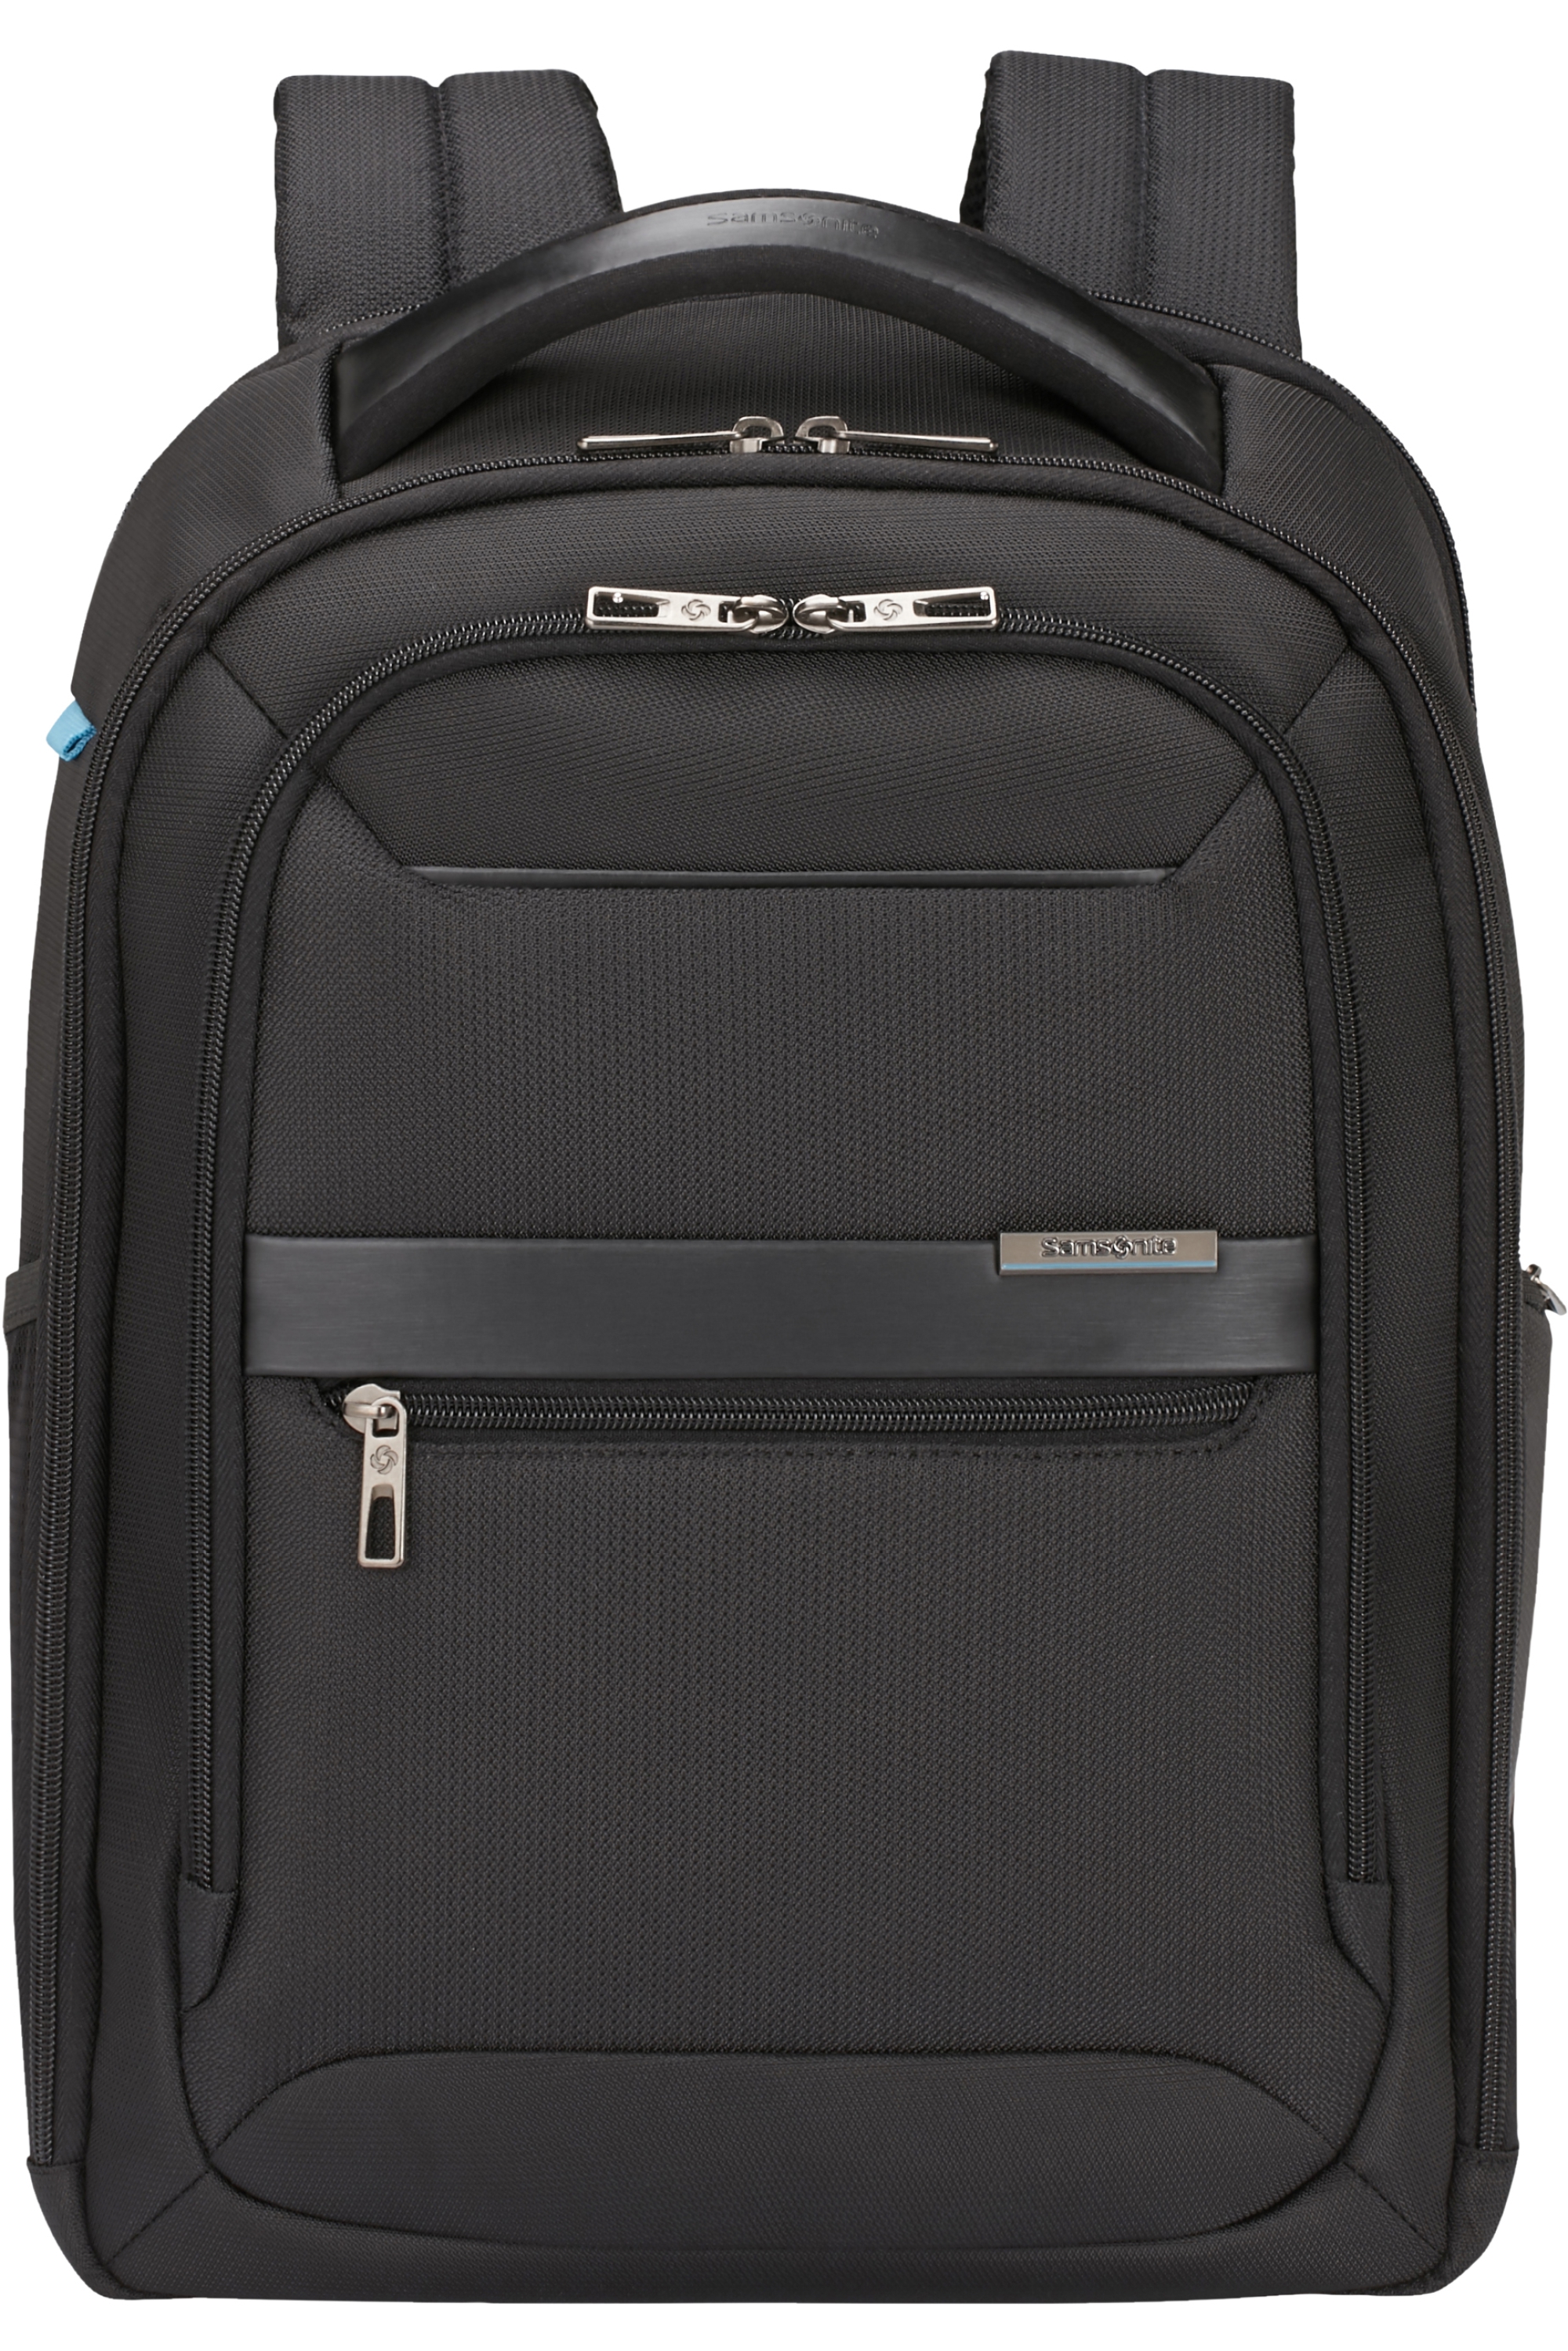 123672-1041-123672_1041_lapt-backpack_14-1_front-e766798b-bf24-4252-a230-aa3800dcccd7-jpg